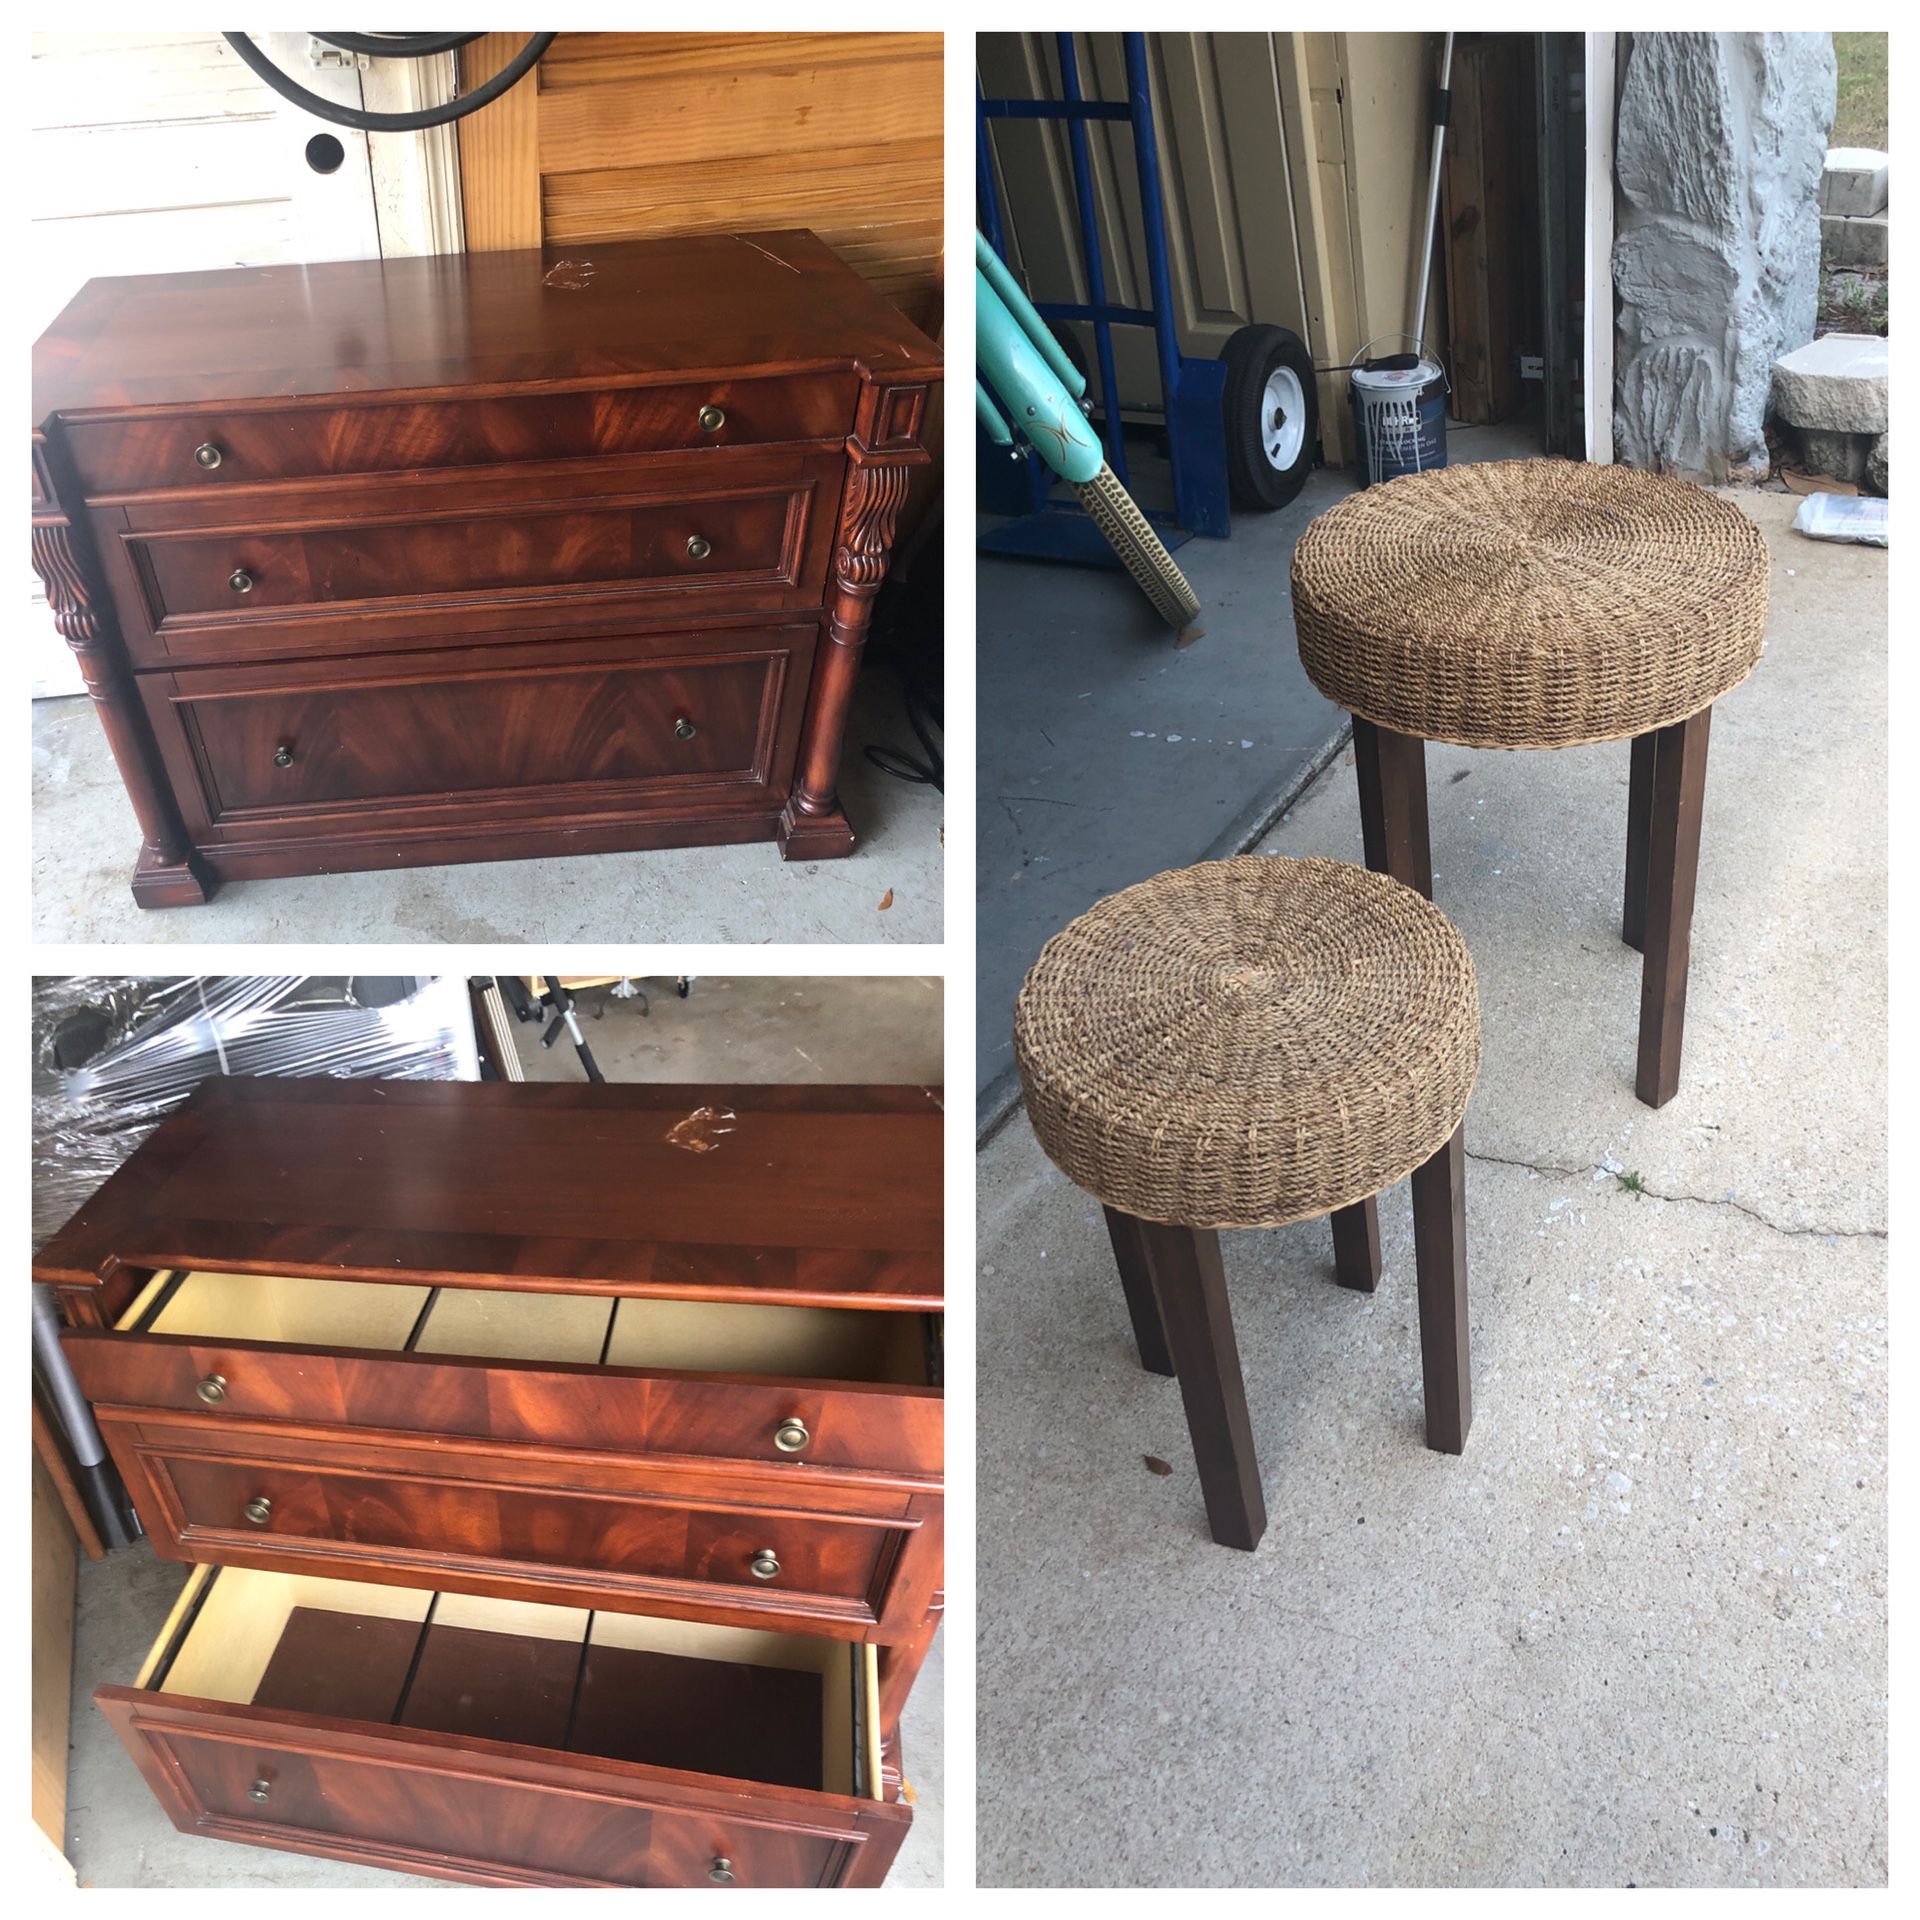 Broyhill solid wood filing cabinet and two end tables. Cabinet is1’8” wide 3’ long 31”high. End tables 16” round 21”high and 12” round and 18” high.